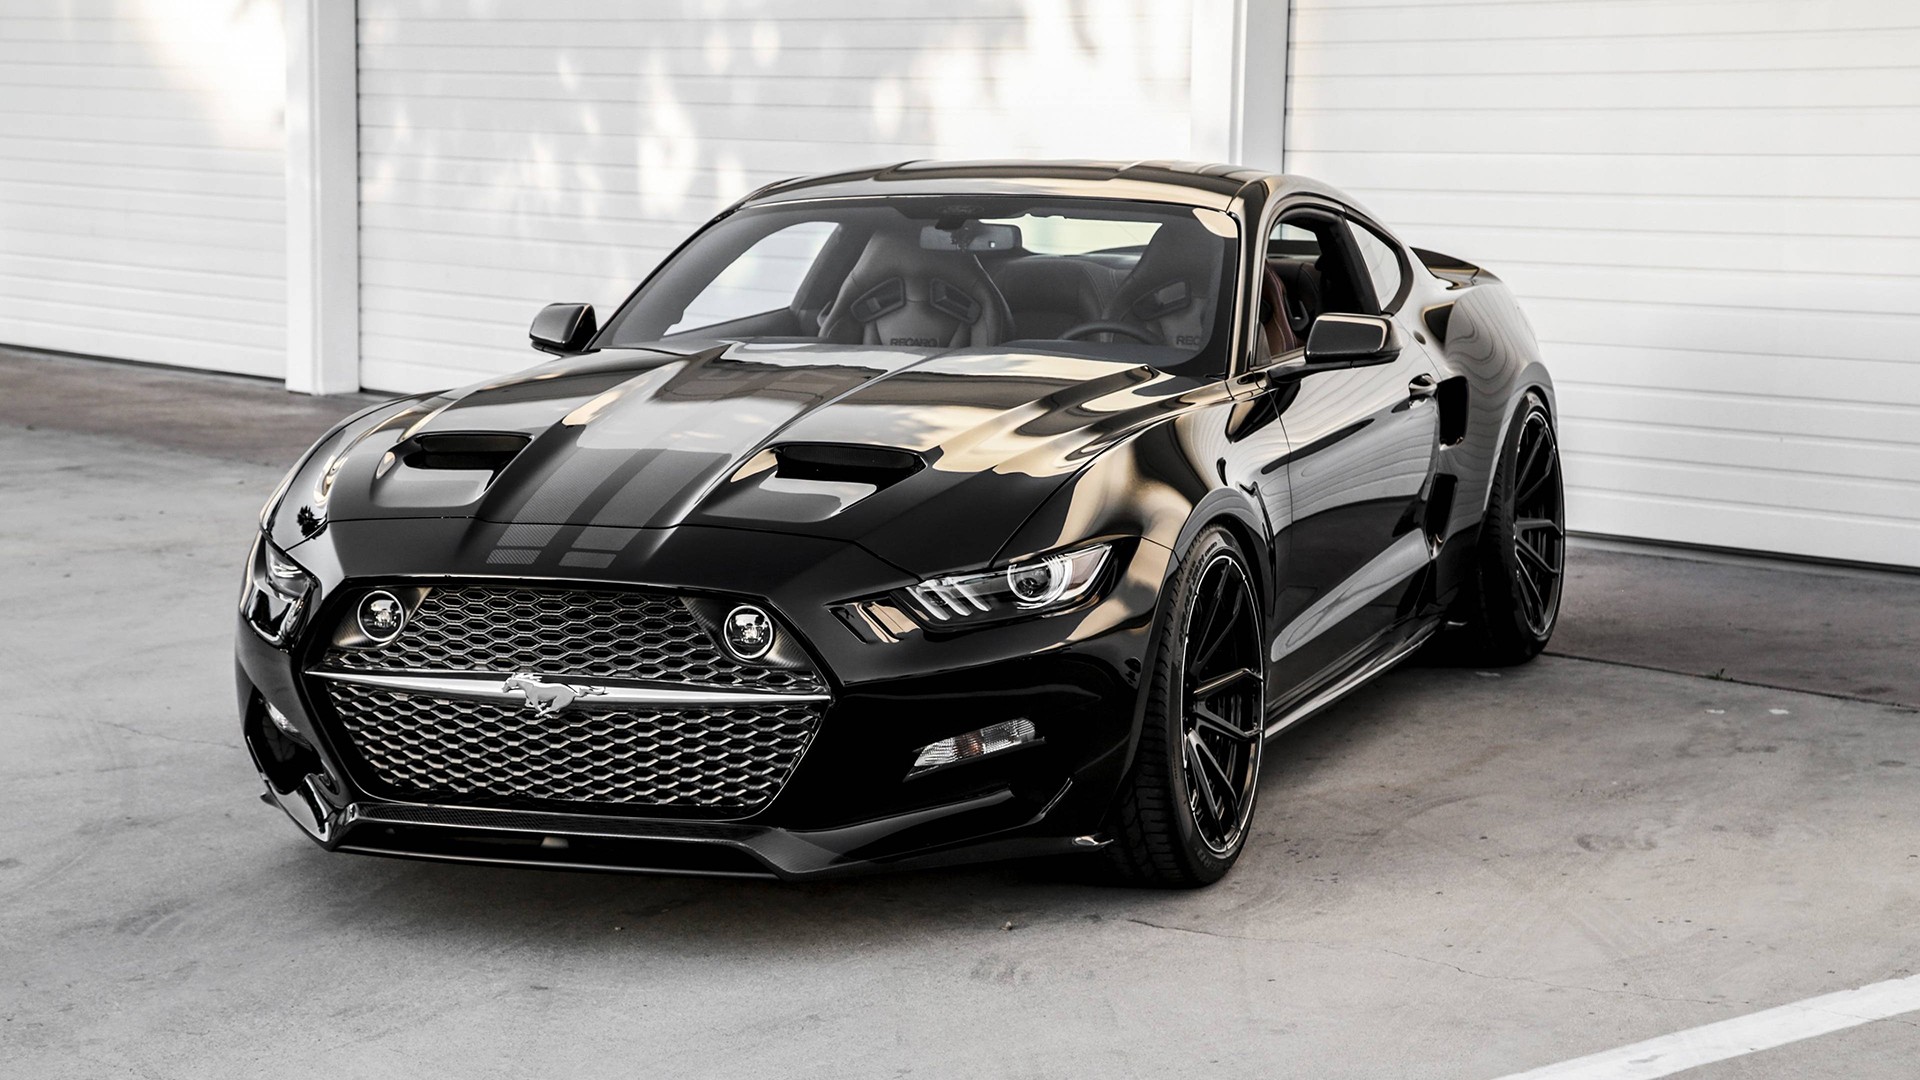 General 1920x1080 Ford Mustang car Ford black cars vehicle racing stripes American cars Ford Mustang S550 muscle cars